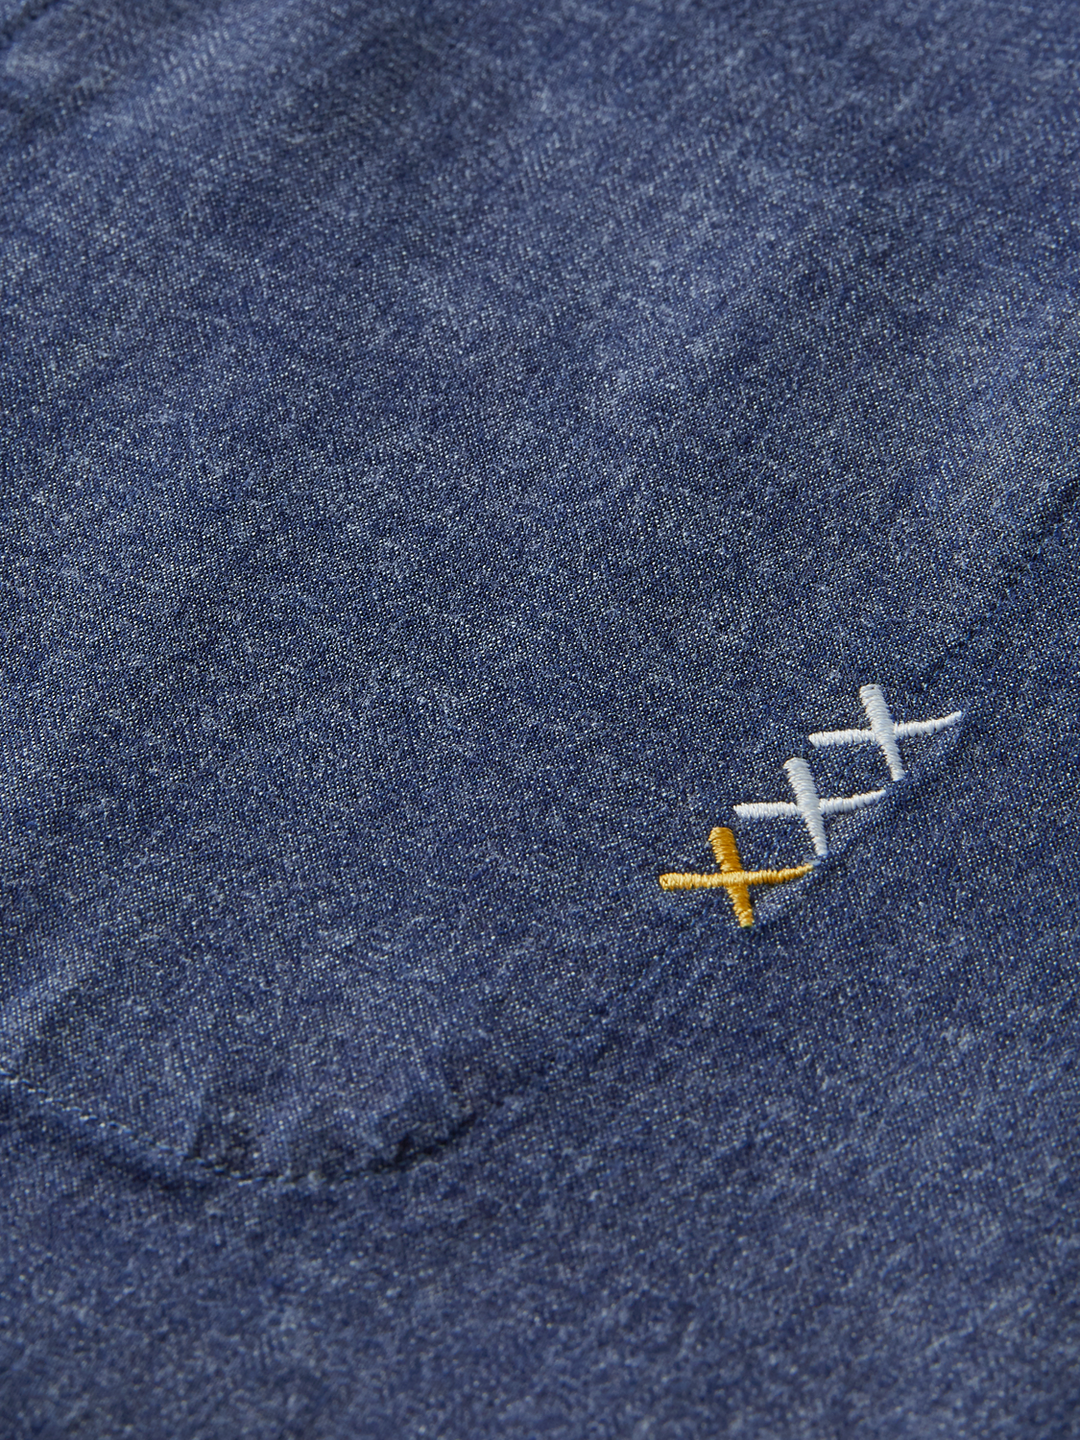 Stretch Chambray Shirt in Indigo | Buster McGee